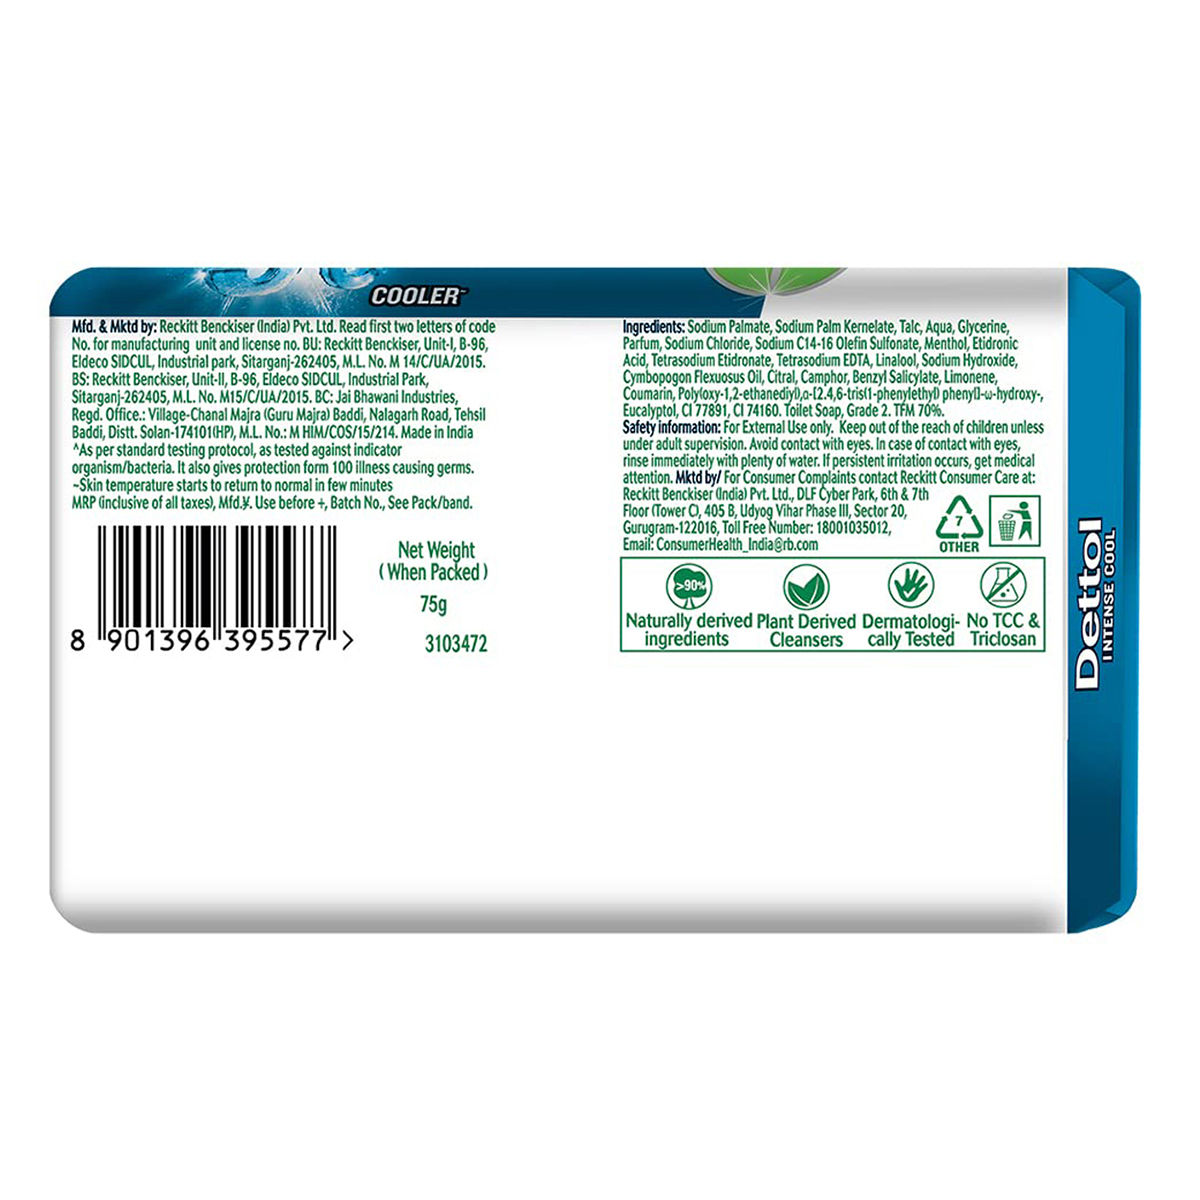 Dettol Cool Soap, 75 gm Price, Uses, Side Effects, Composition Apollo  Pharmacy